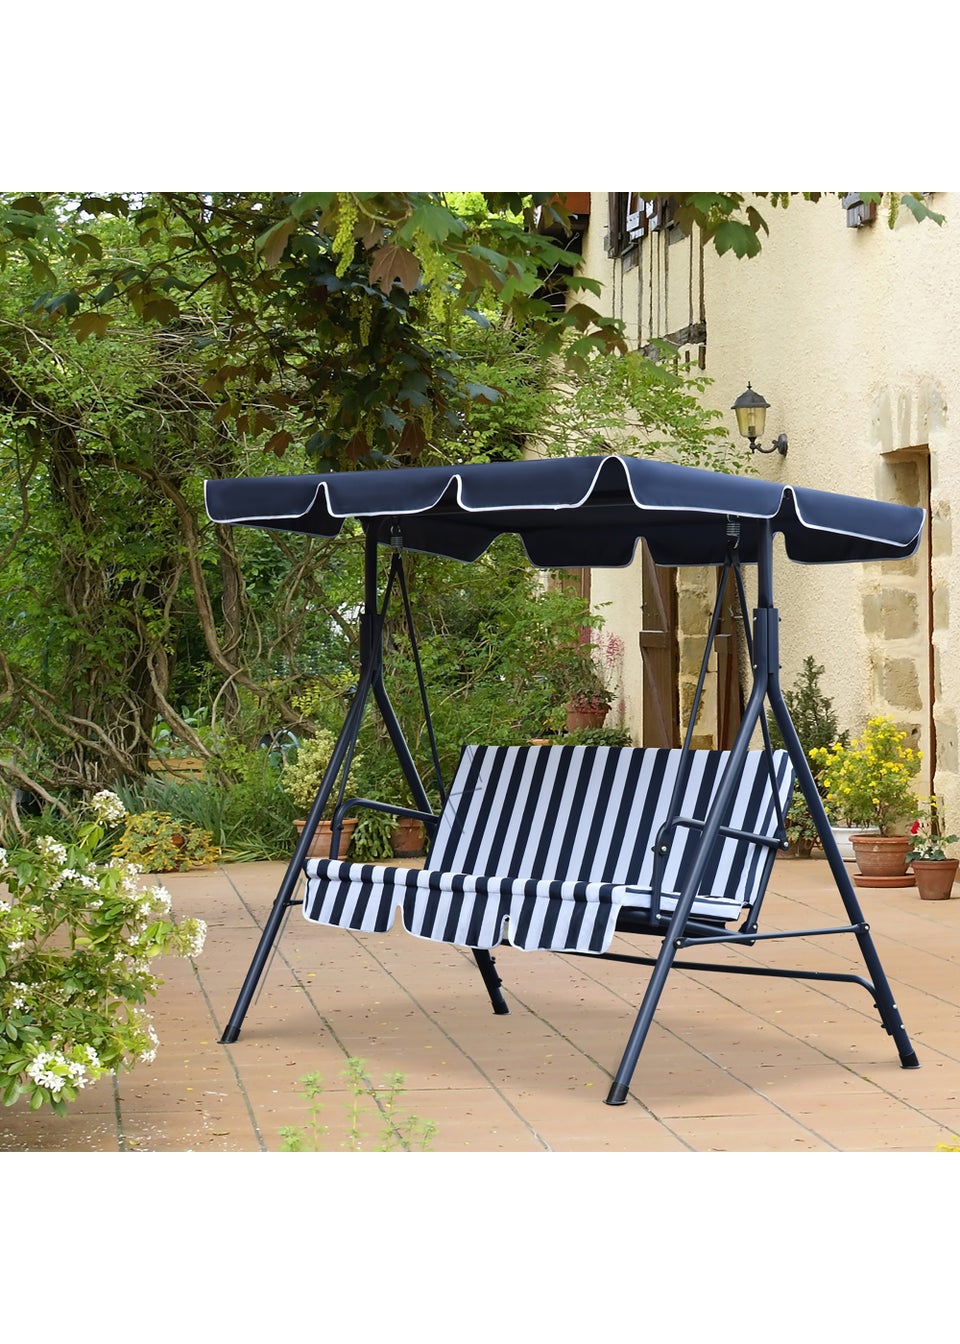 Outsunny Outdoor 3 Seat Canopy Swing Chair (172cm x 110cm x 153cm)